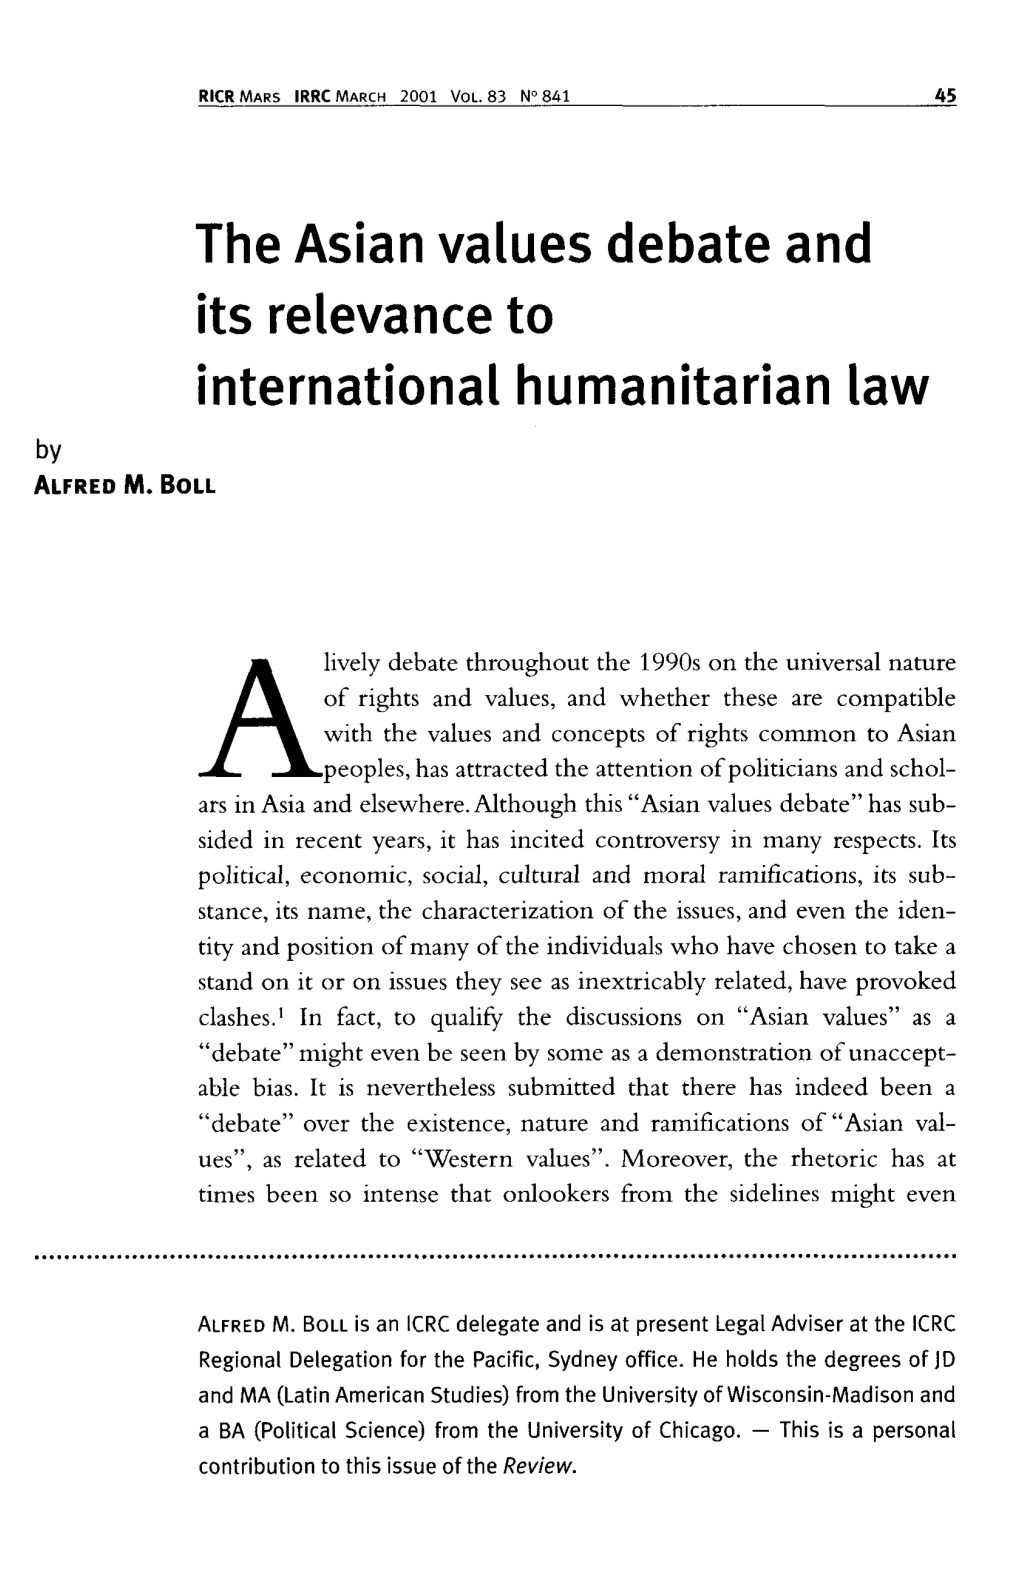 The Asian Values Debate and Its Relevance to International Humanitarian Law by ALFRED M